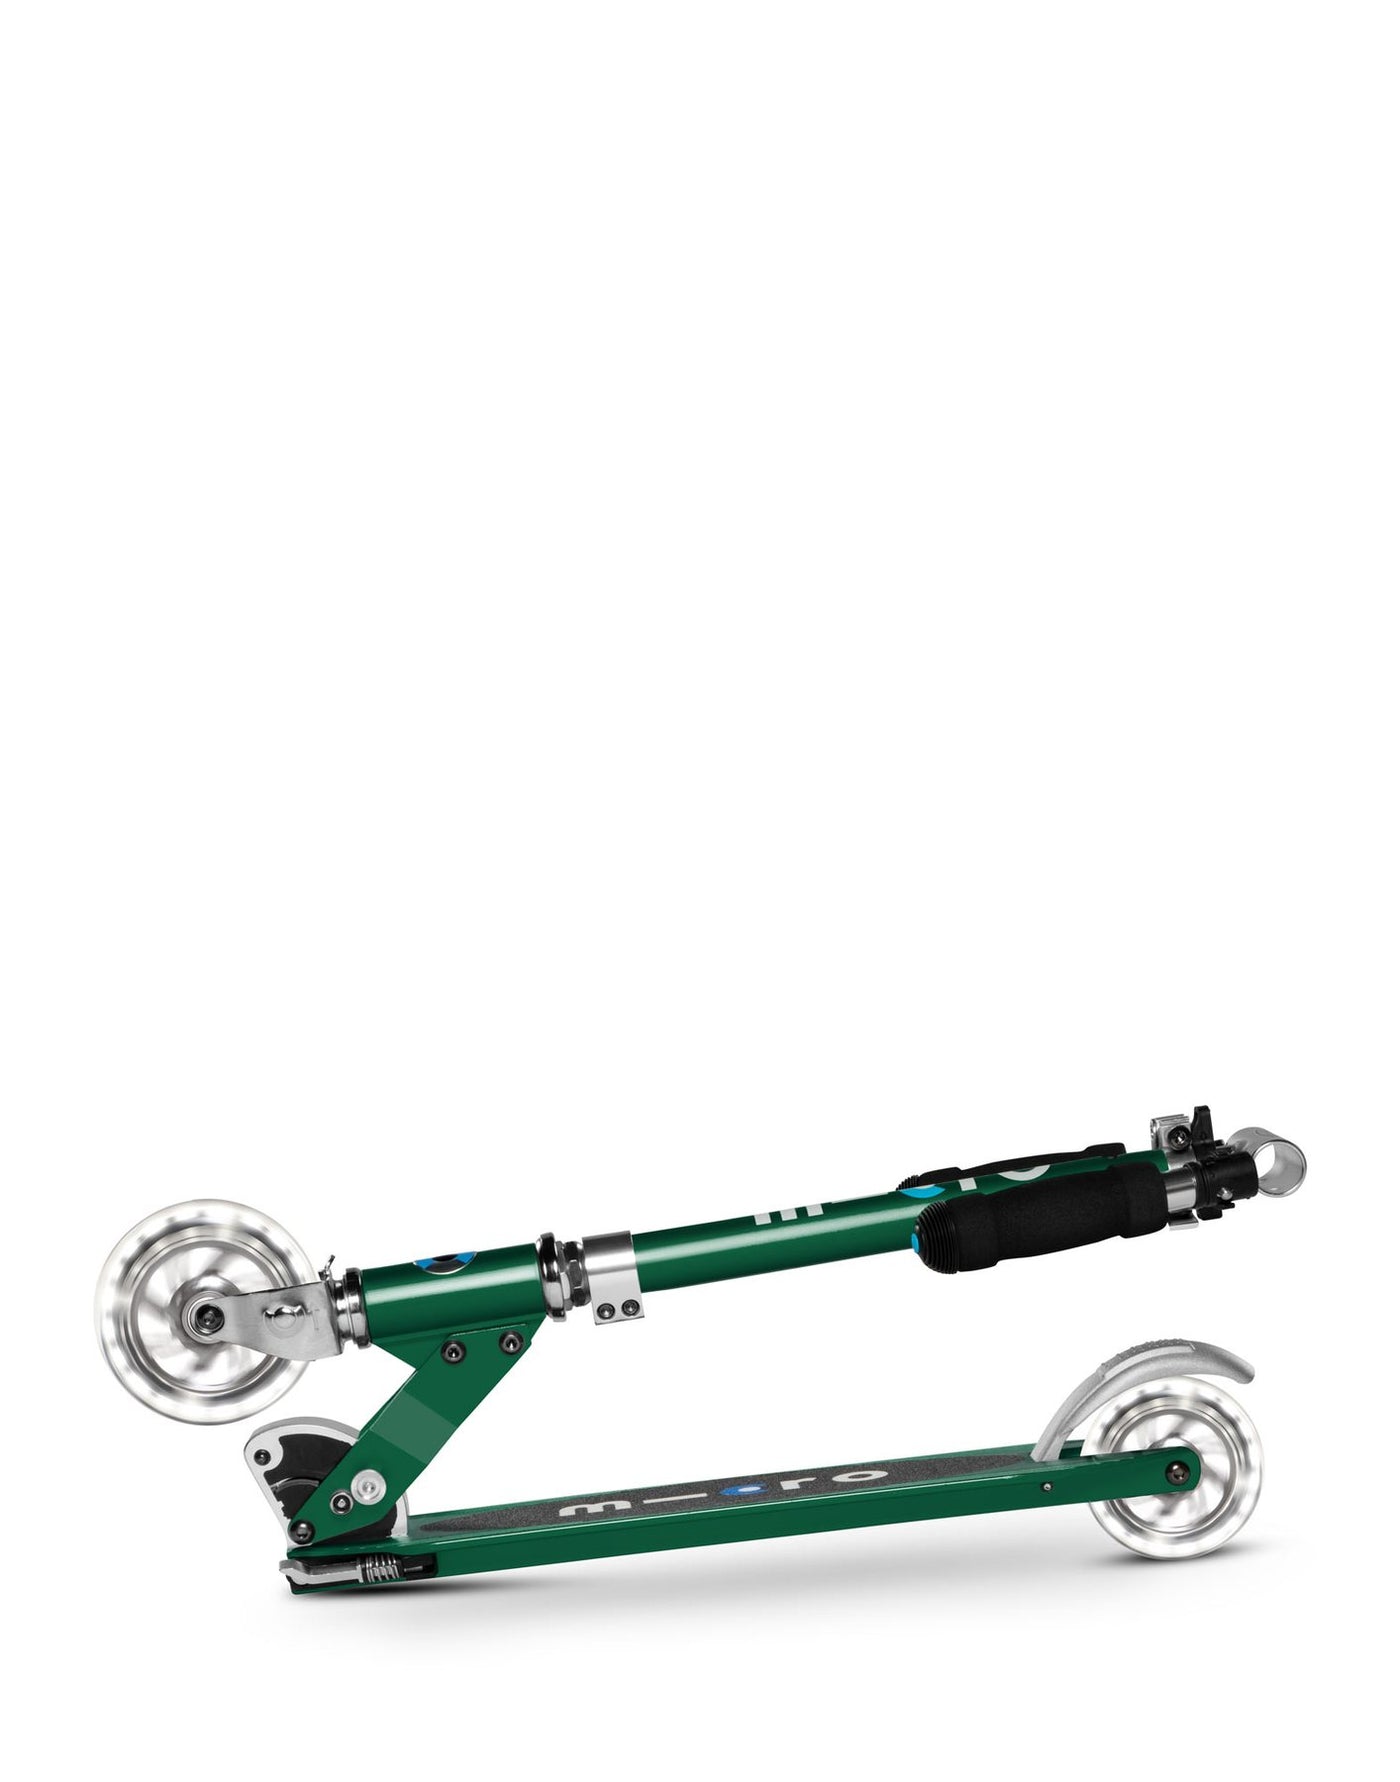 micro sprite 2 wheel scooter forest green foldable